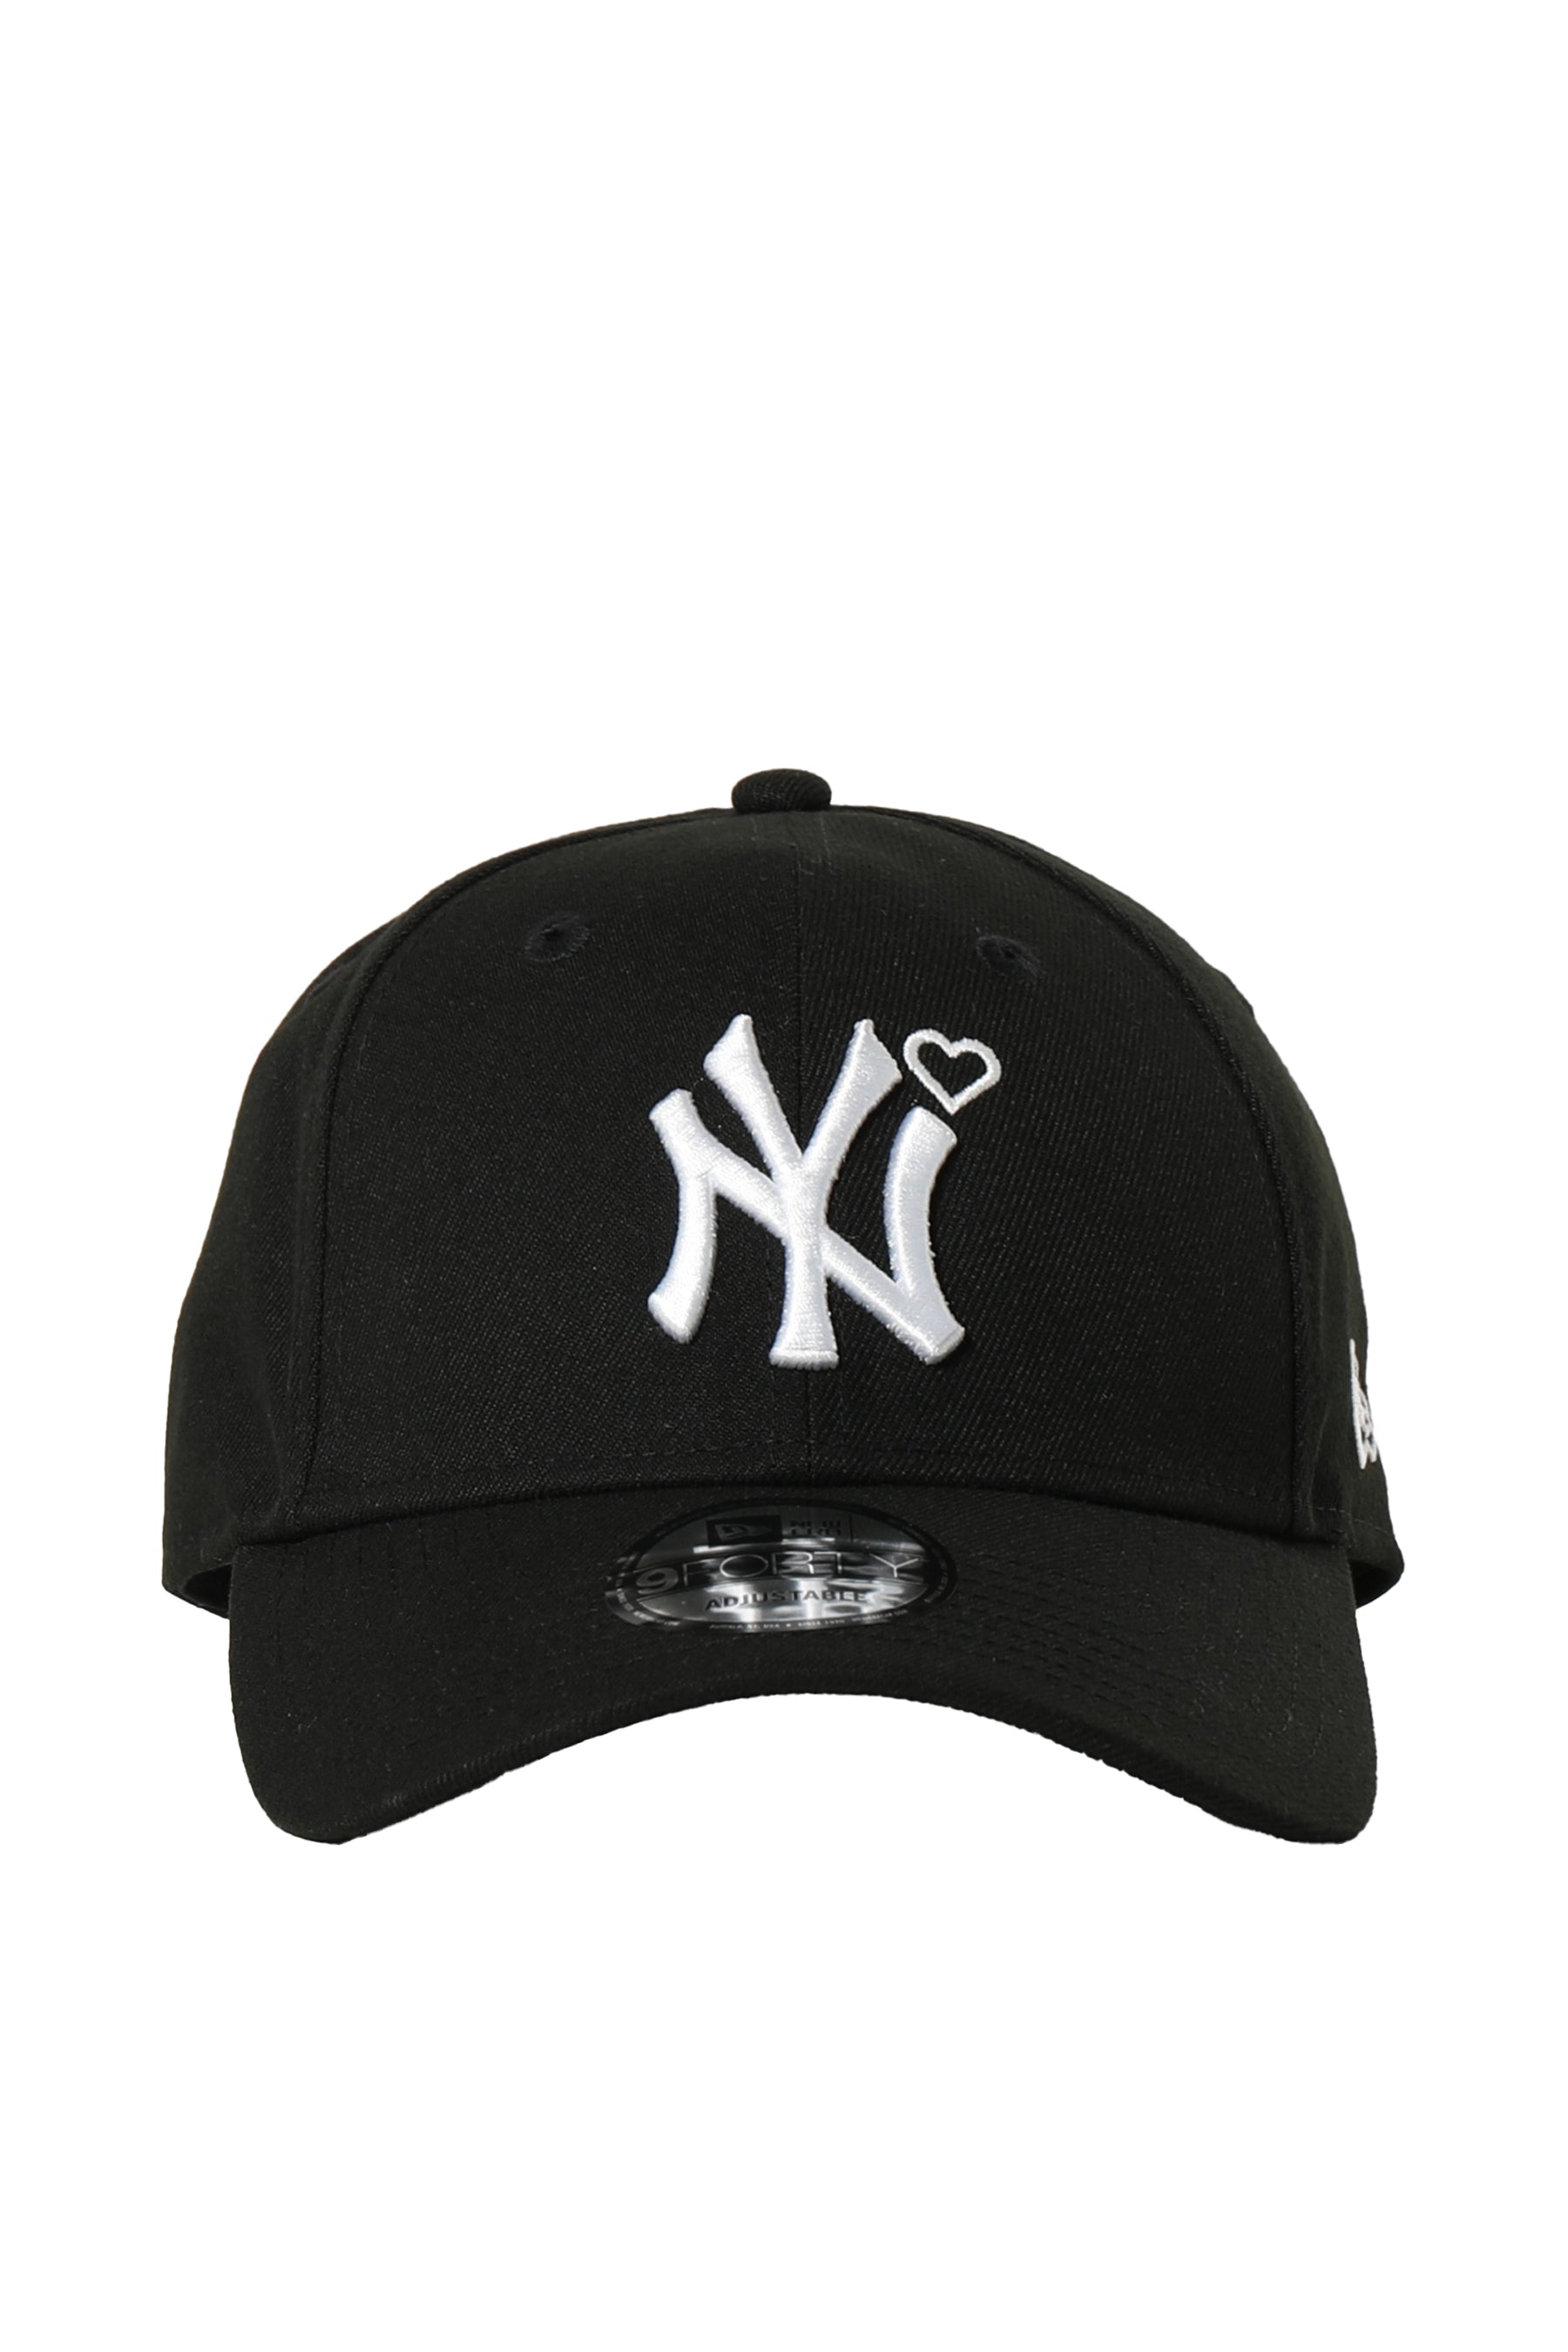 BLK/WHT FORTY YANKEES HEART 9 -NUBIAN CAP SS24 / EMBROIDERY BASICKS